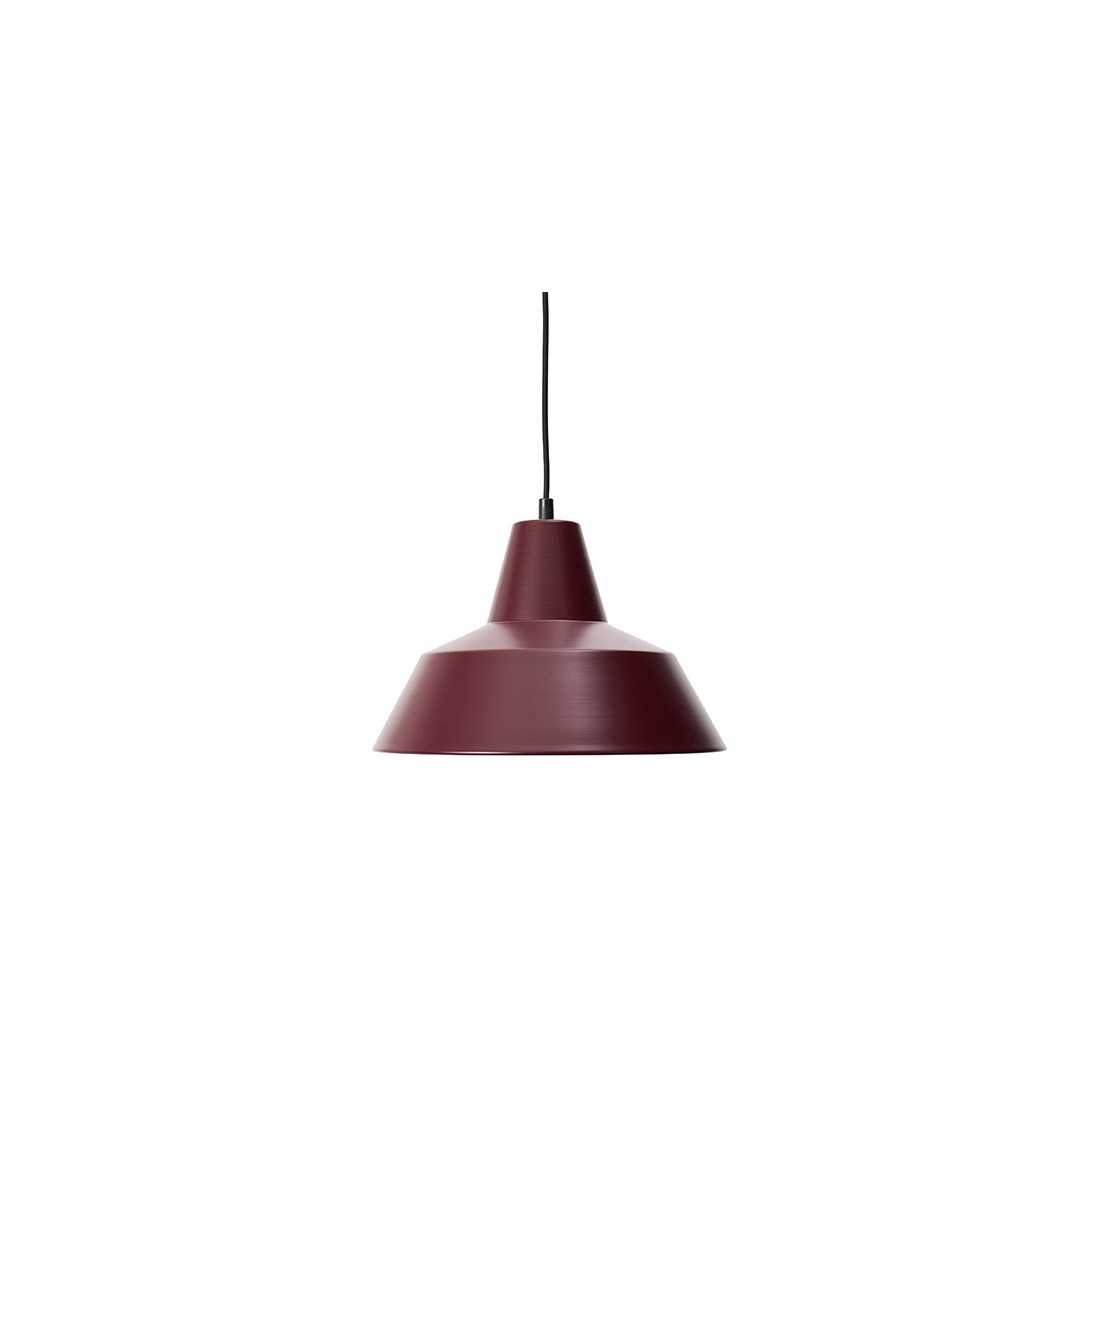 Made By Hand – Workshop Taklampa W2 Wine Red